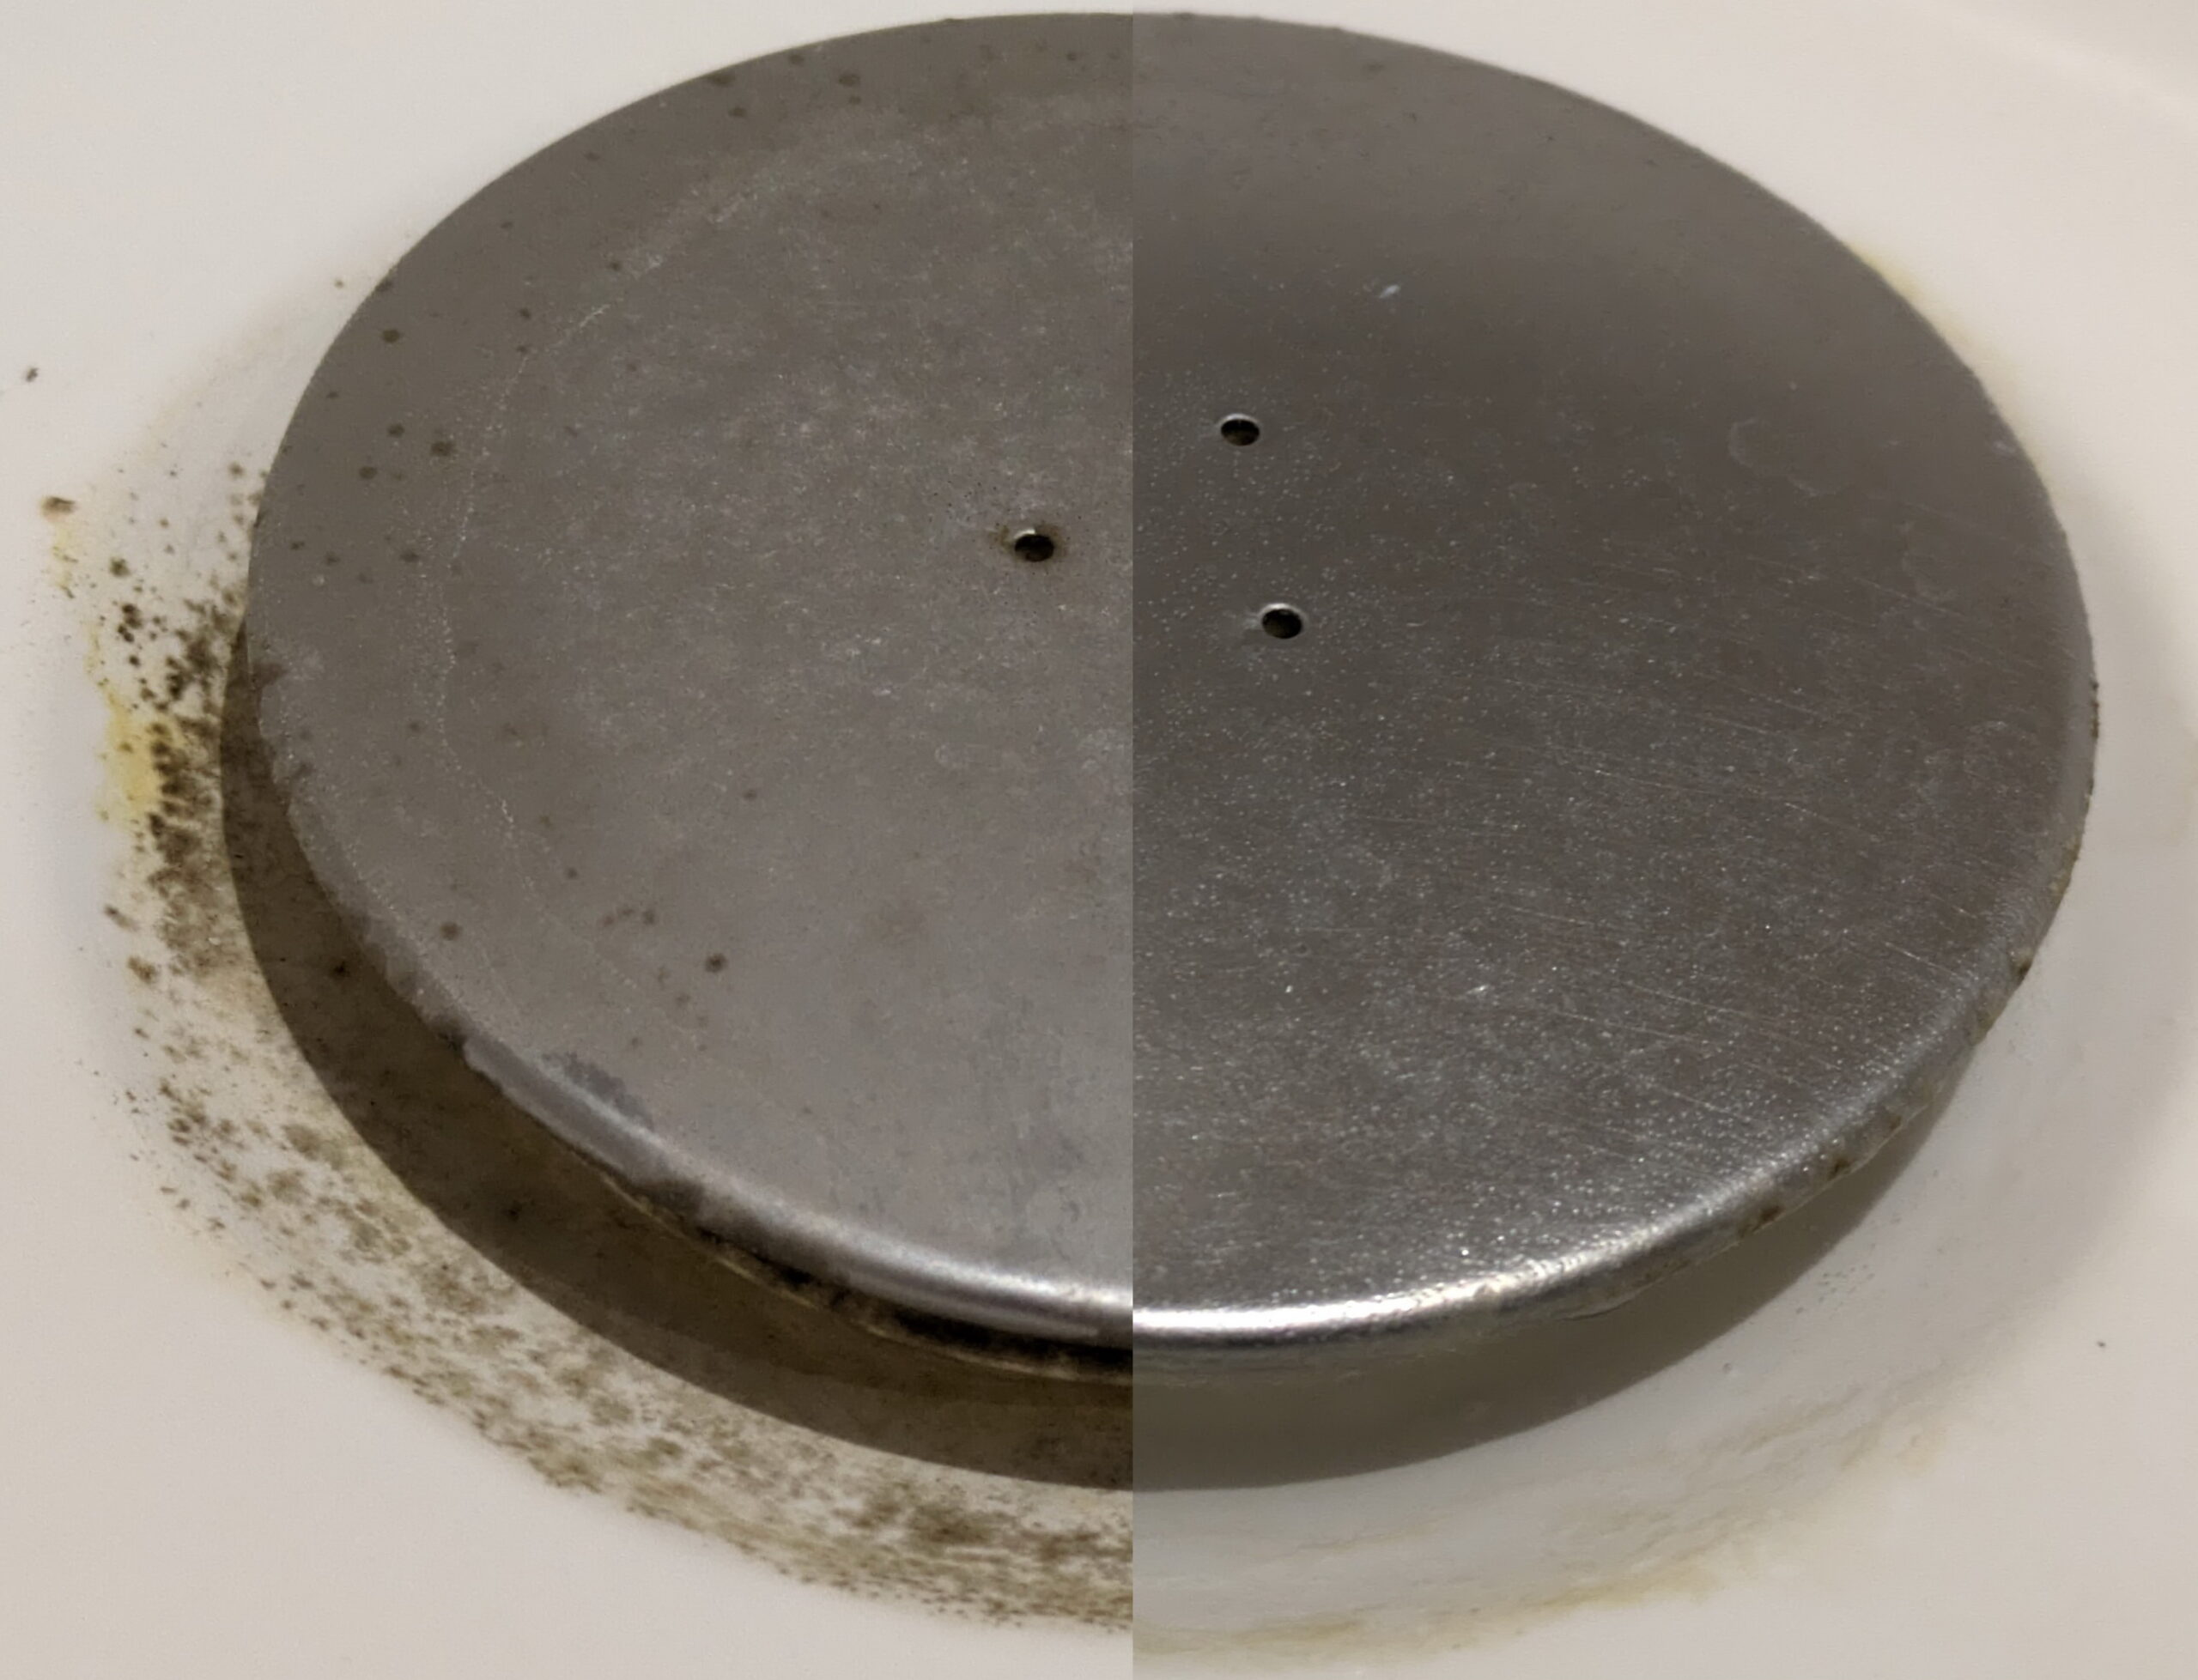 Before/after photo showing a shower drain plug after treatment for mould